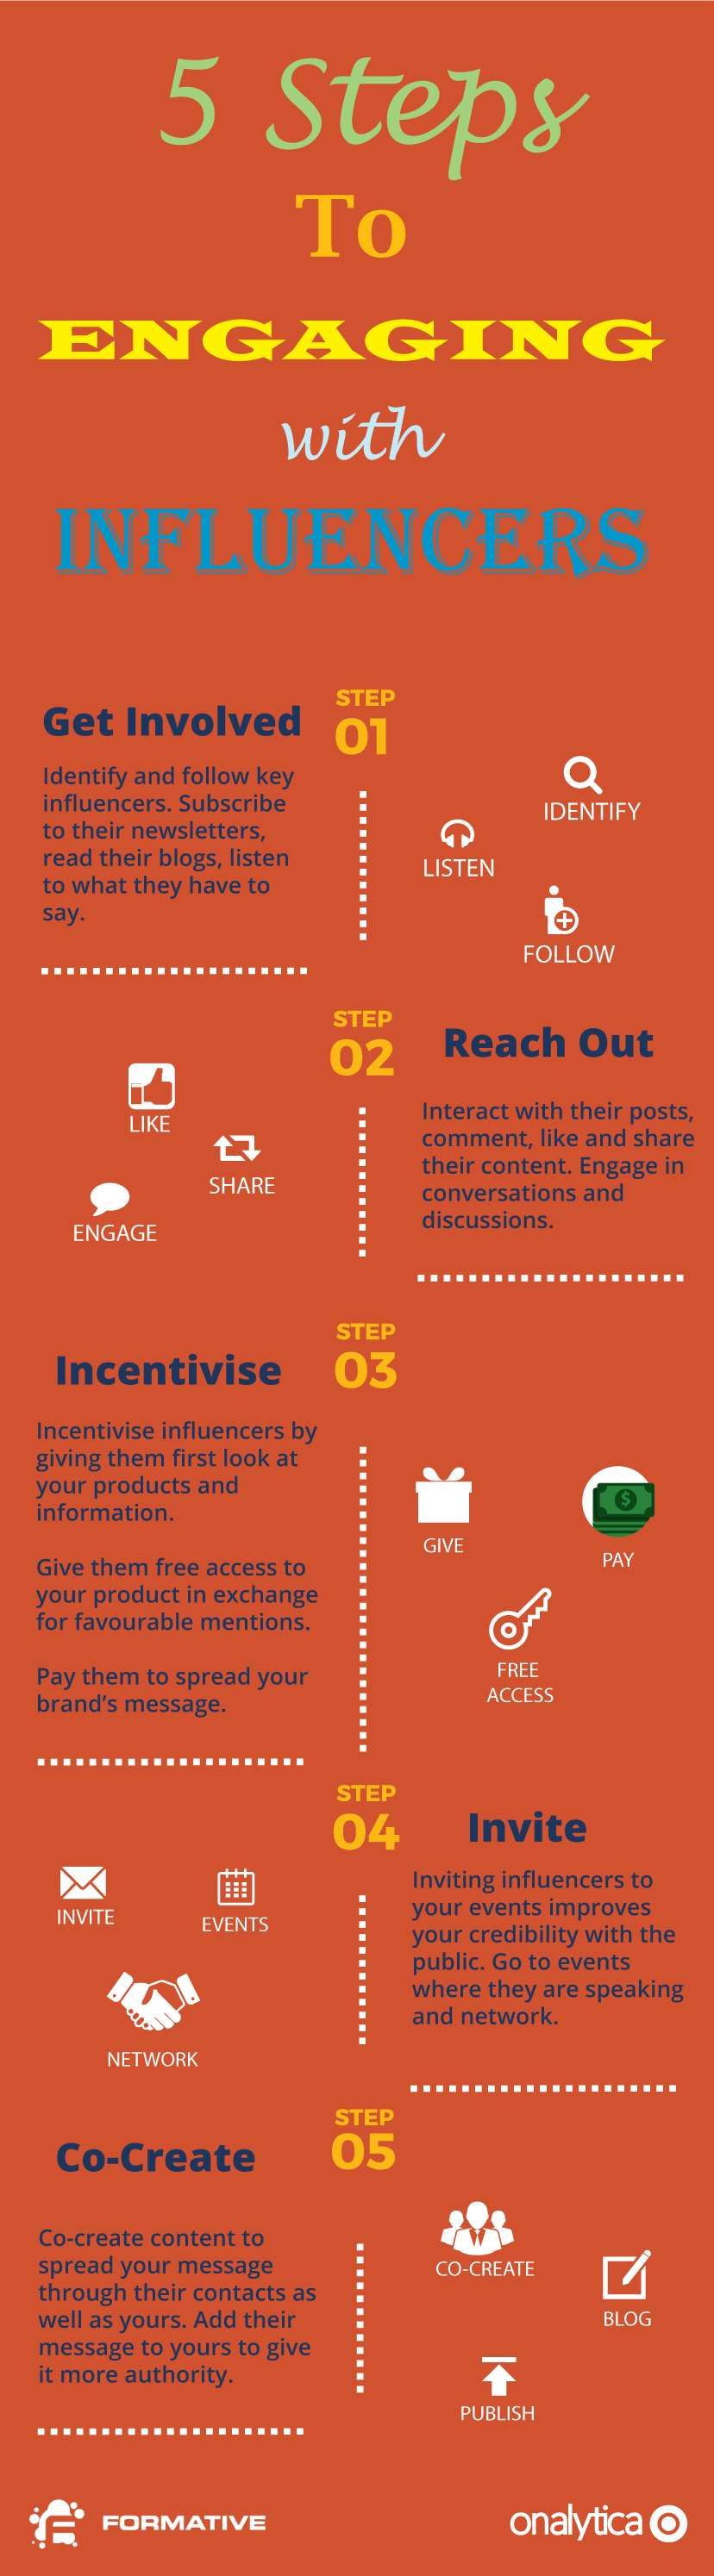 Onalytica / Formative - 5 Ways to engage with Influencers [INFOGRAPHIC]